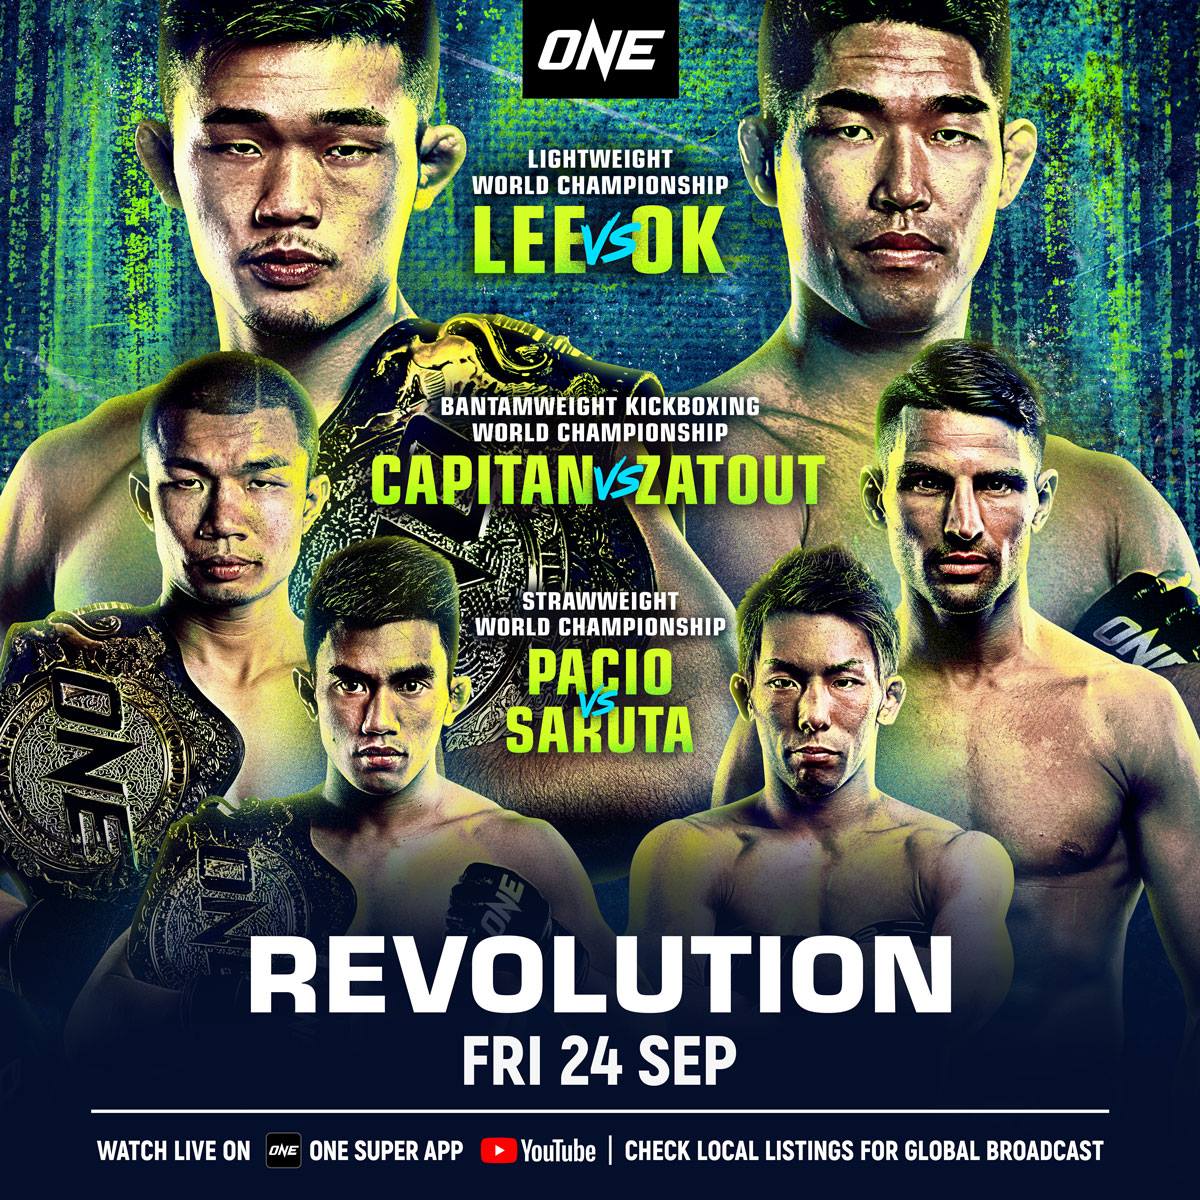 BREAKING NEWS: Get ready for an explosive night of crazy action on September 24 with ONE: Revolution and its 3 world championship title fights! Stay tuned here for the full fight card shortly! BOOM!!!